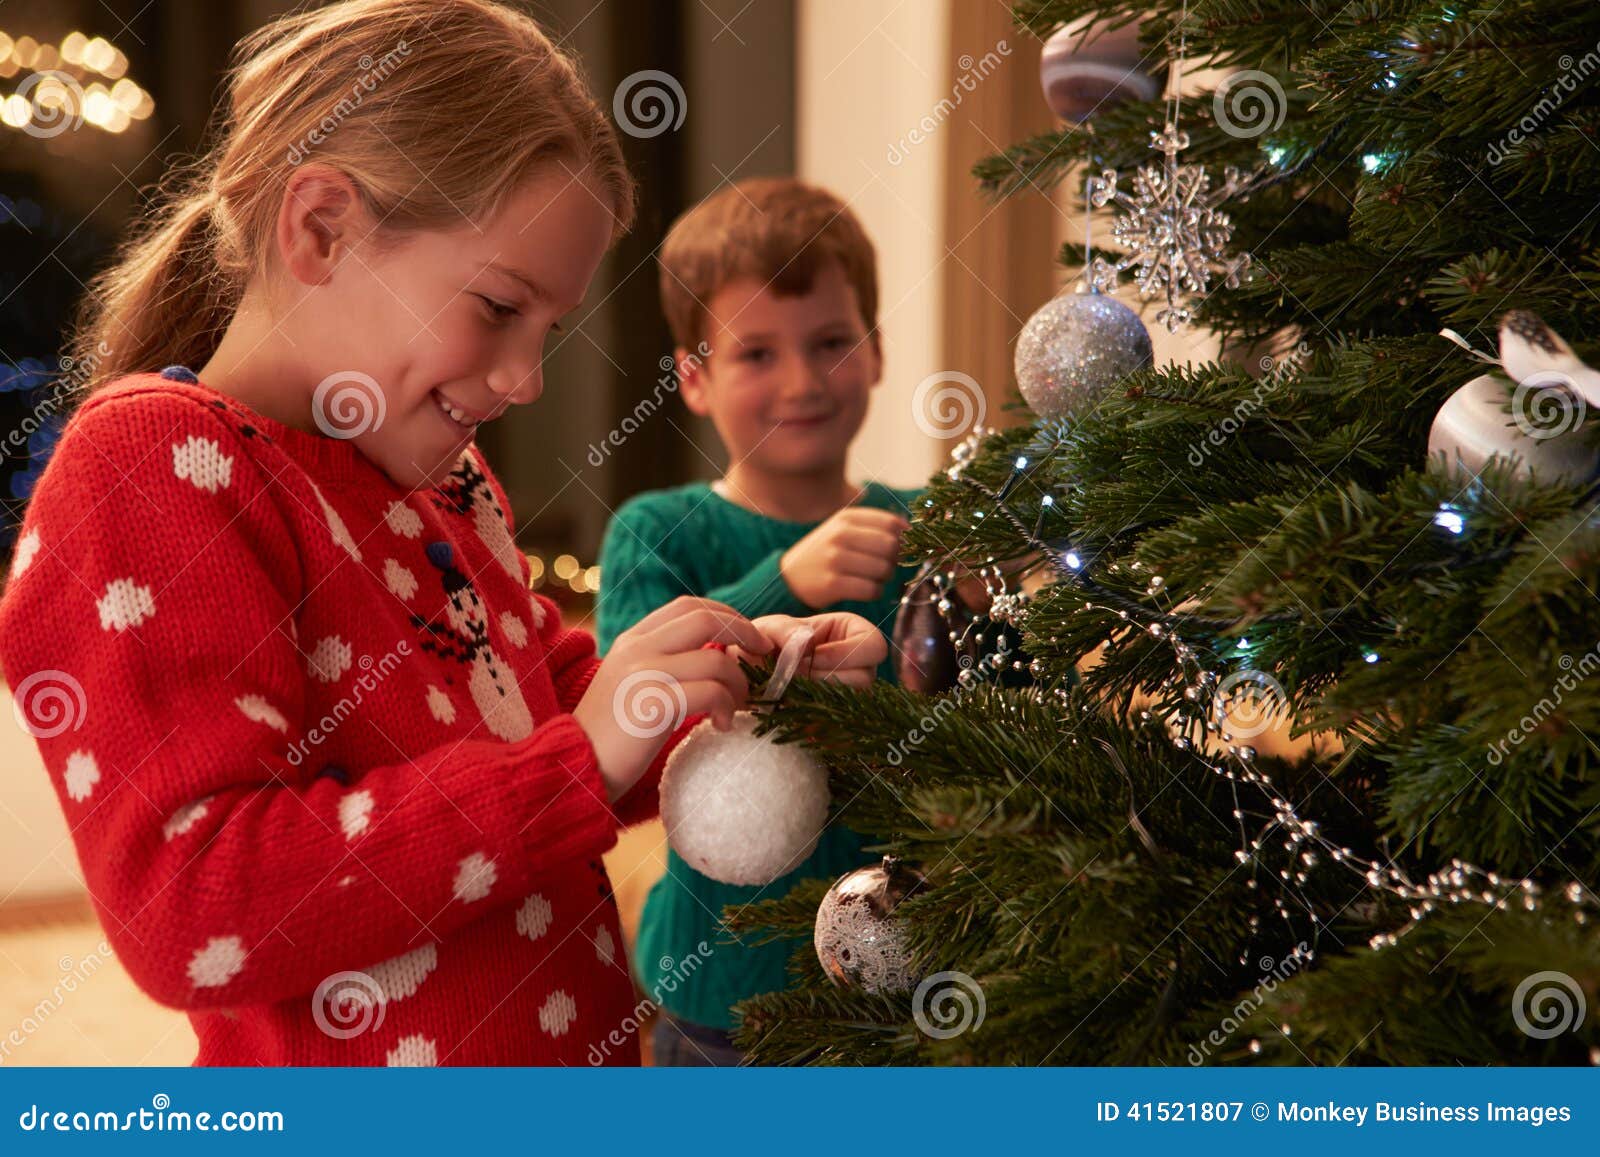 children decorating christmas tree at home